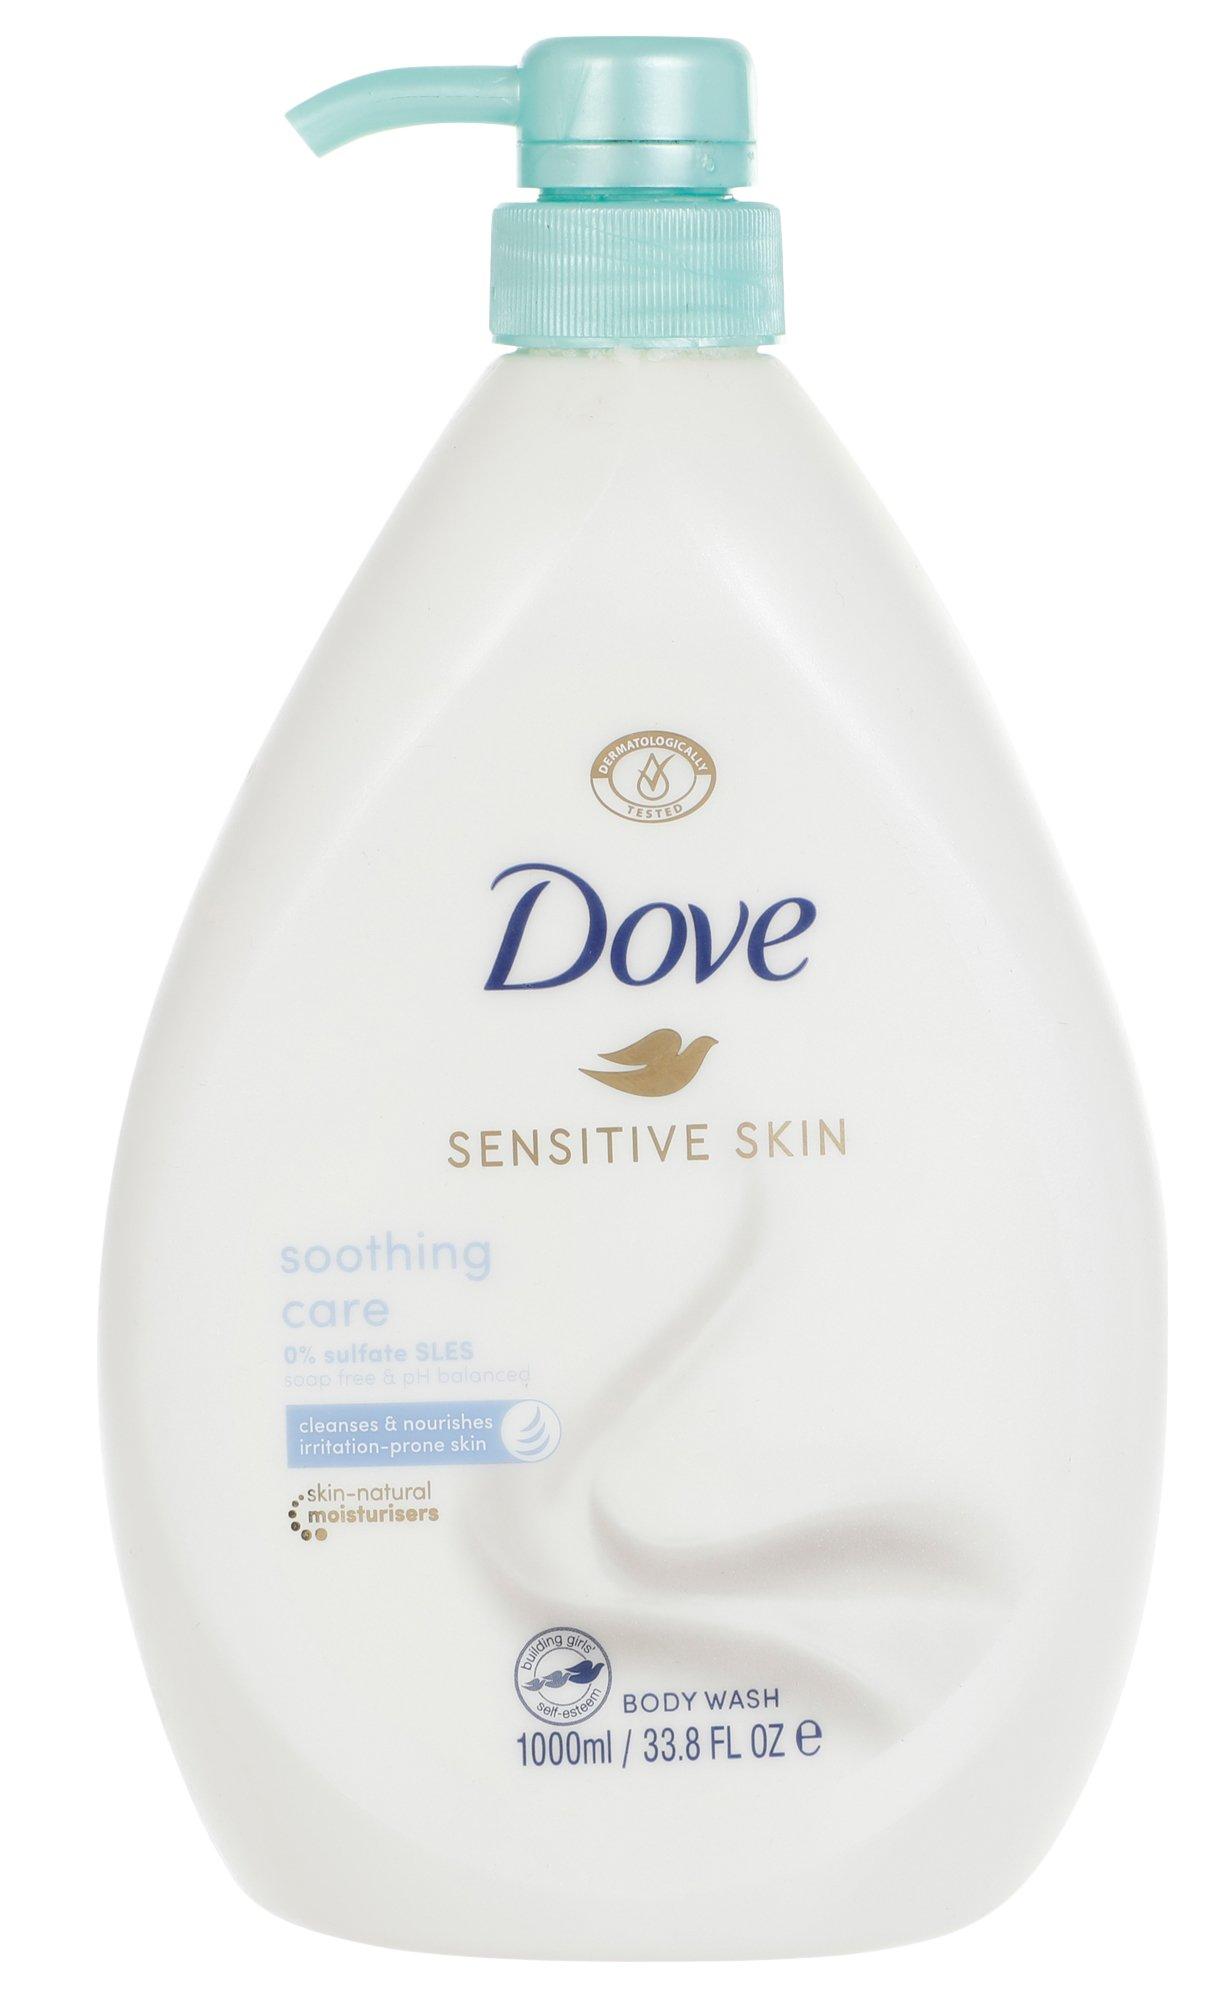 Soothing Care Sensitive Skin Body Wash